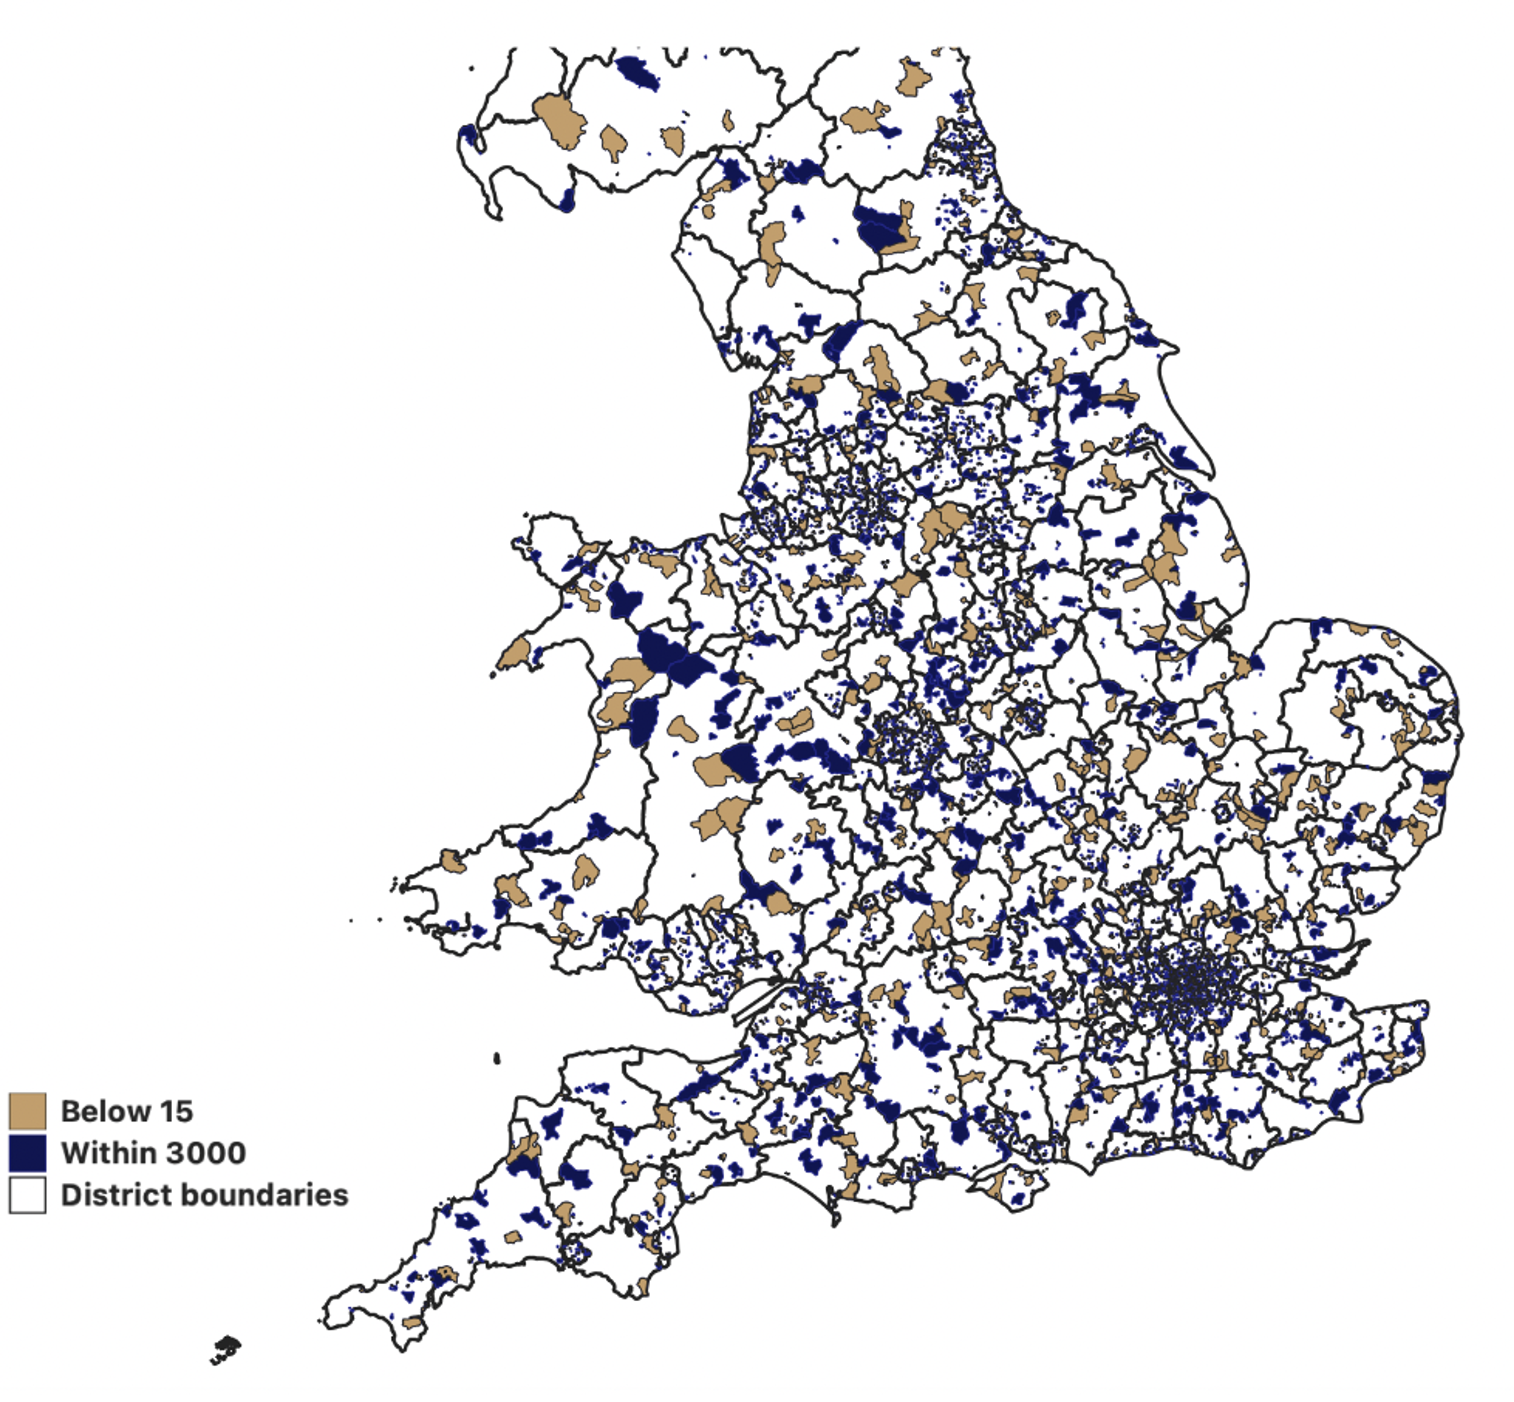 Figure 2 Spatial distribution of eligible areas and areas within chosen bandwidth across England and Wales points to feasibility to estimate heterogenous treatment effects